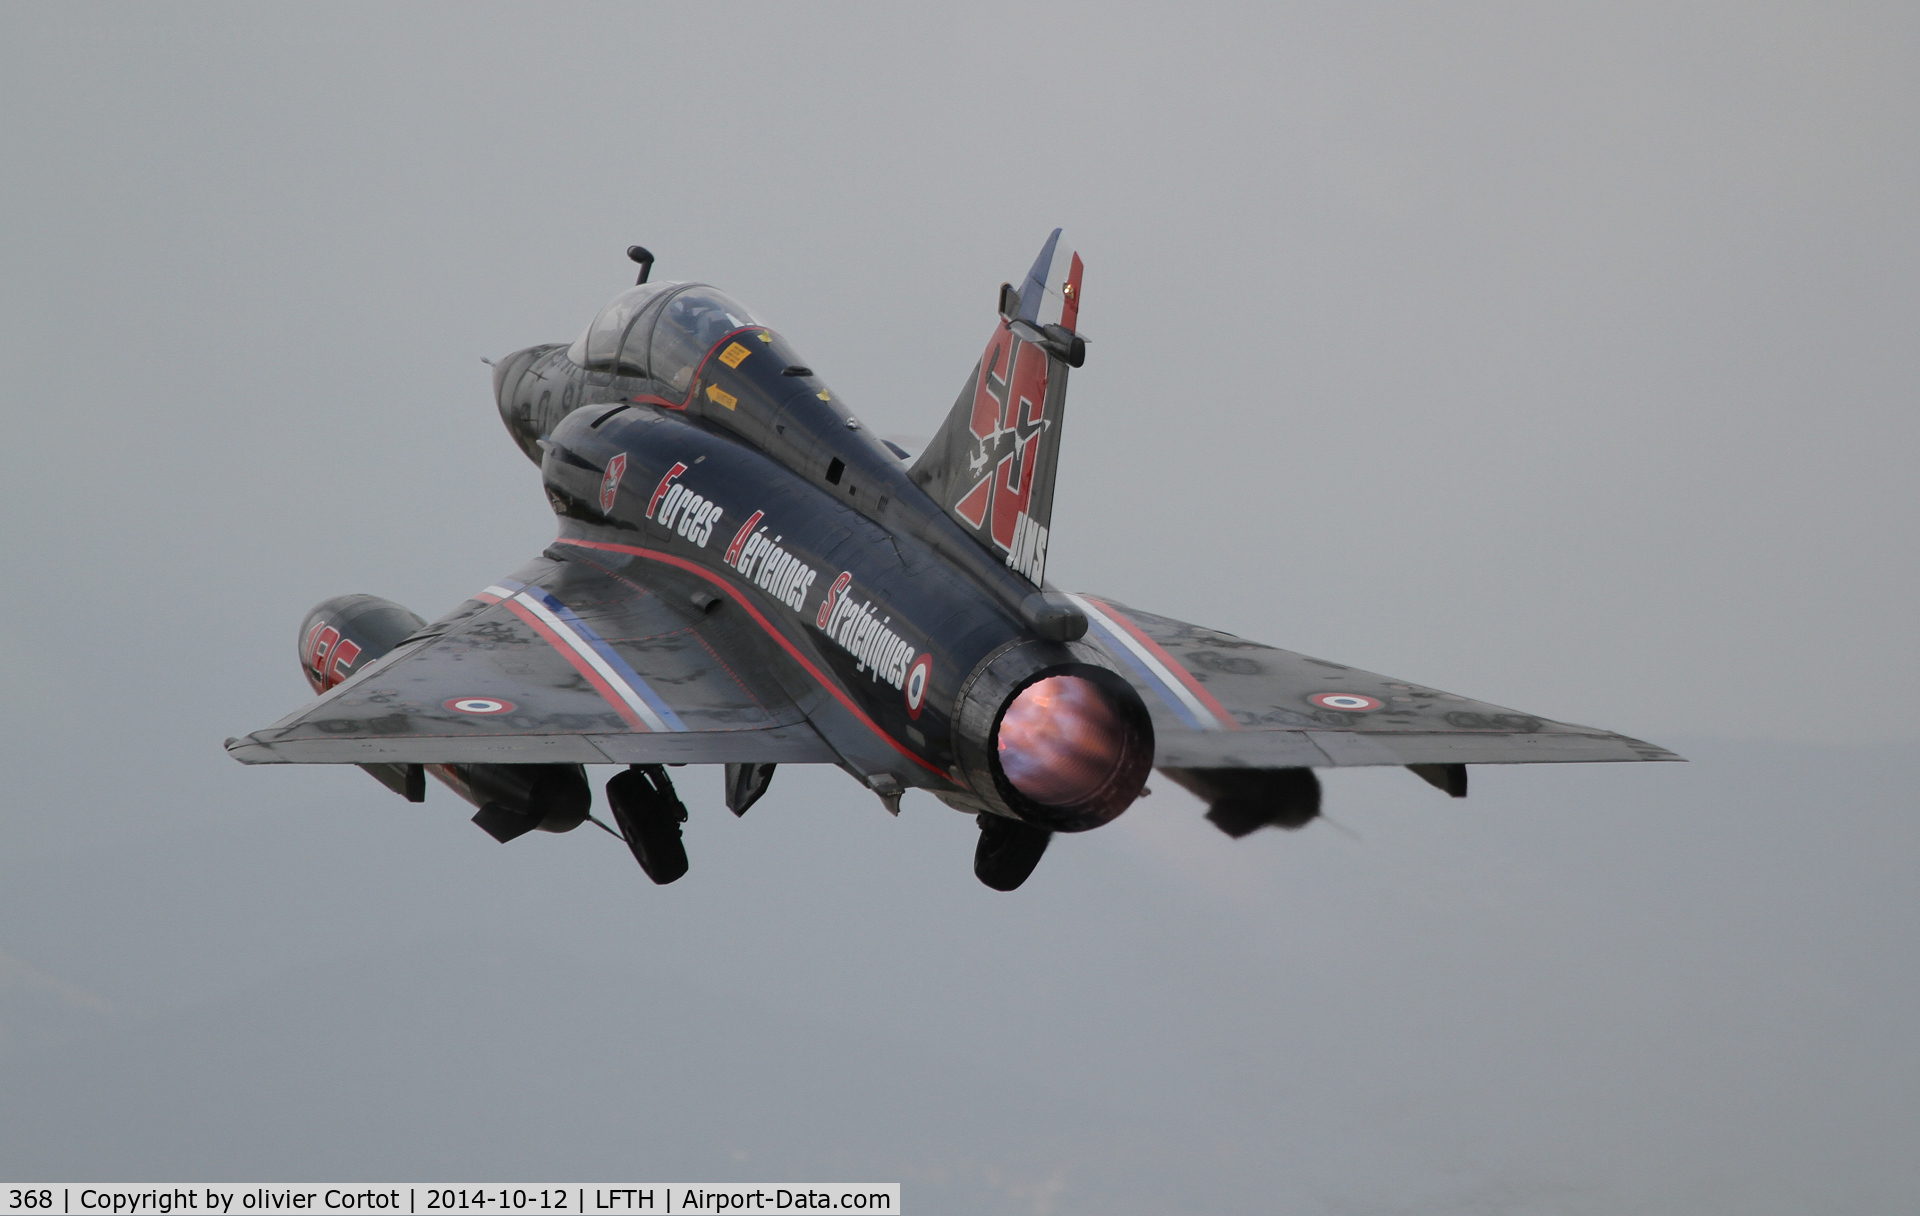 368, Dassault Mirage 2000N C/N 364, taking off from Hyeres airport